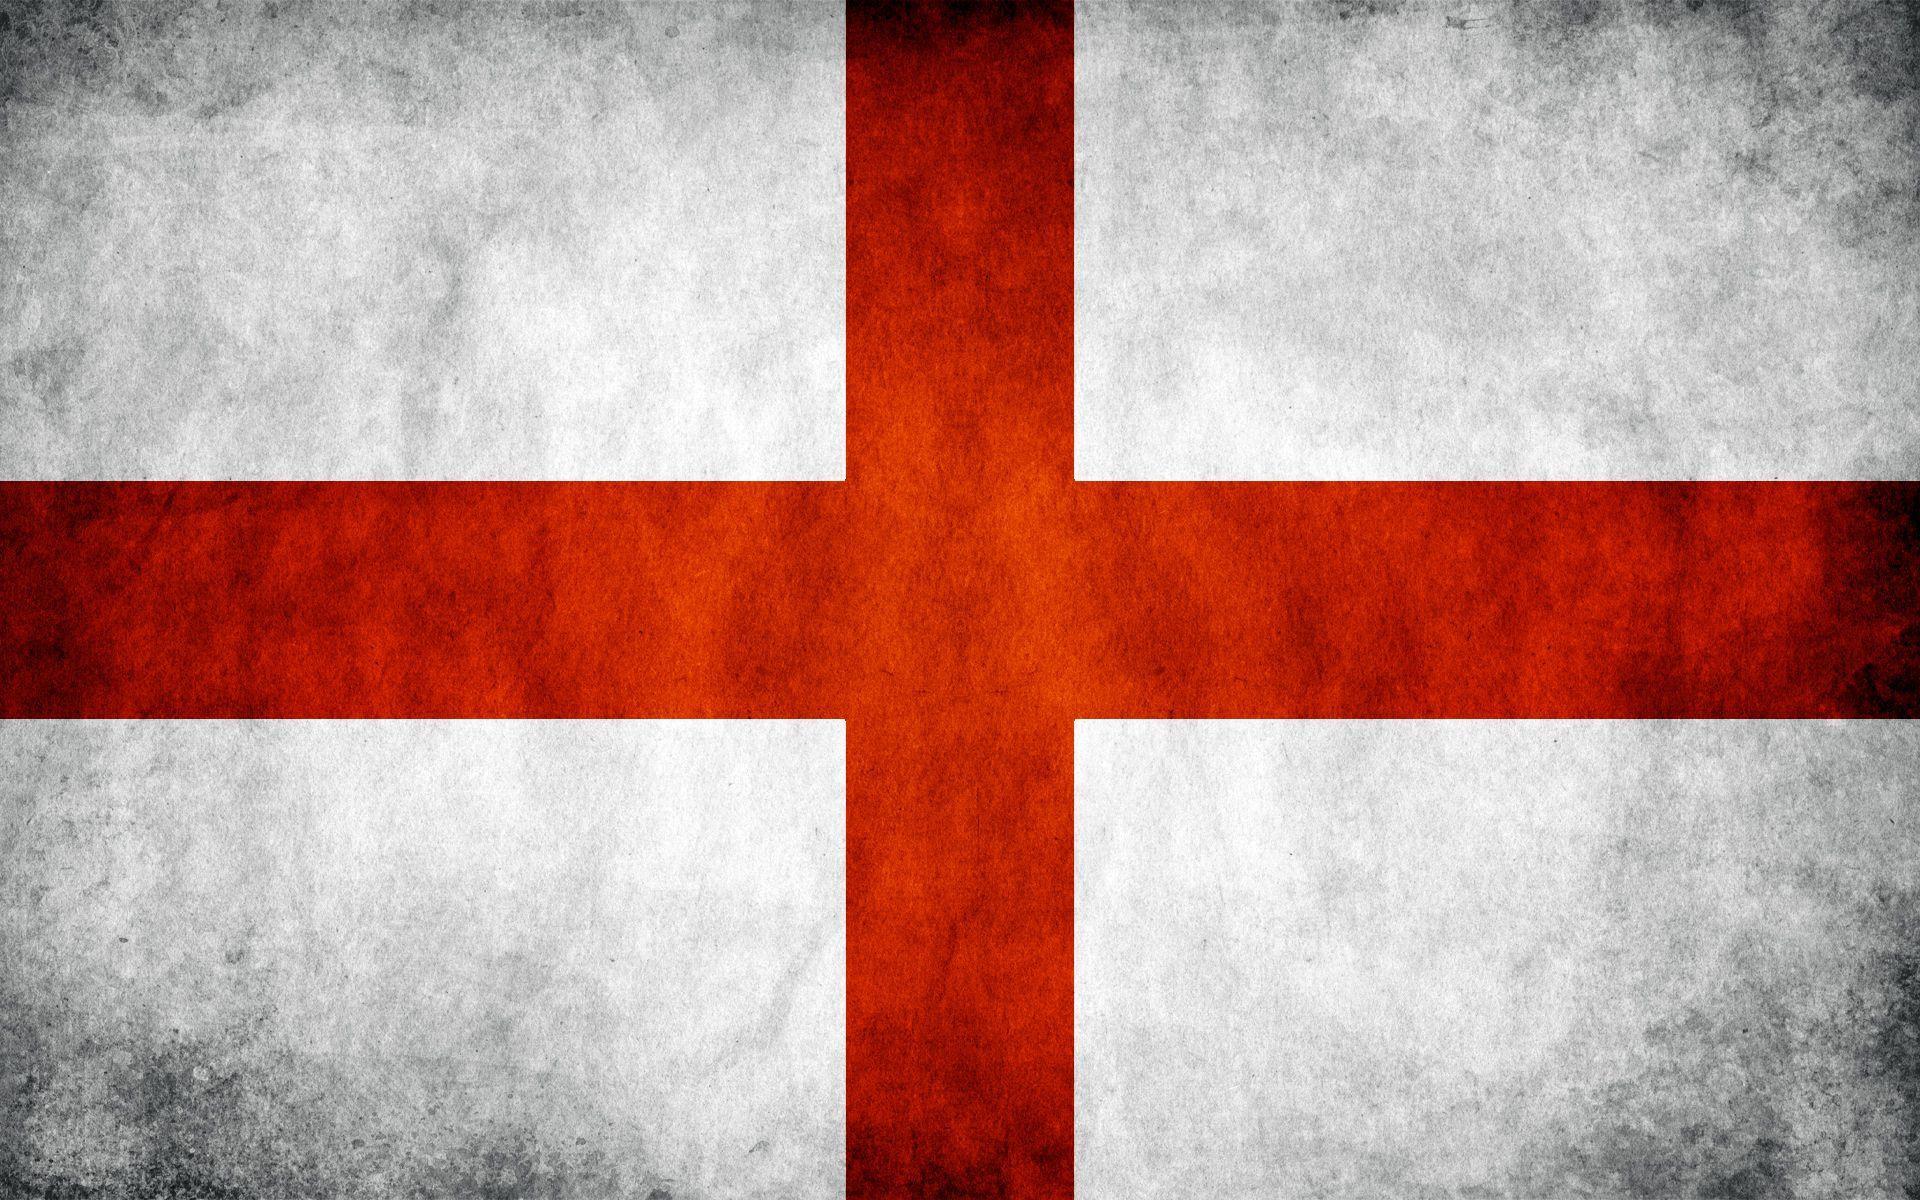 red cross. England flag wallpaper, Rugby wallpaper, England rugby